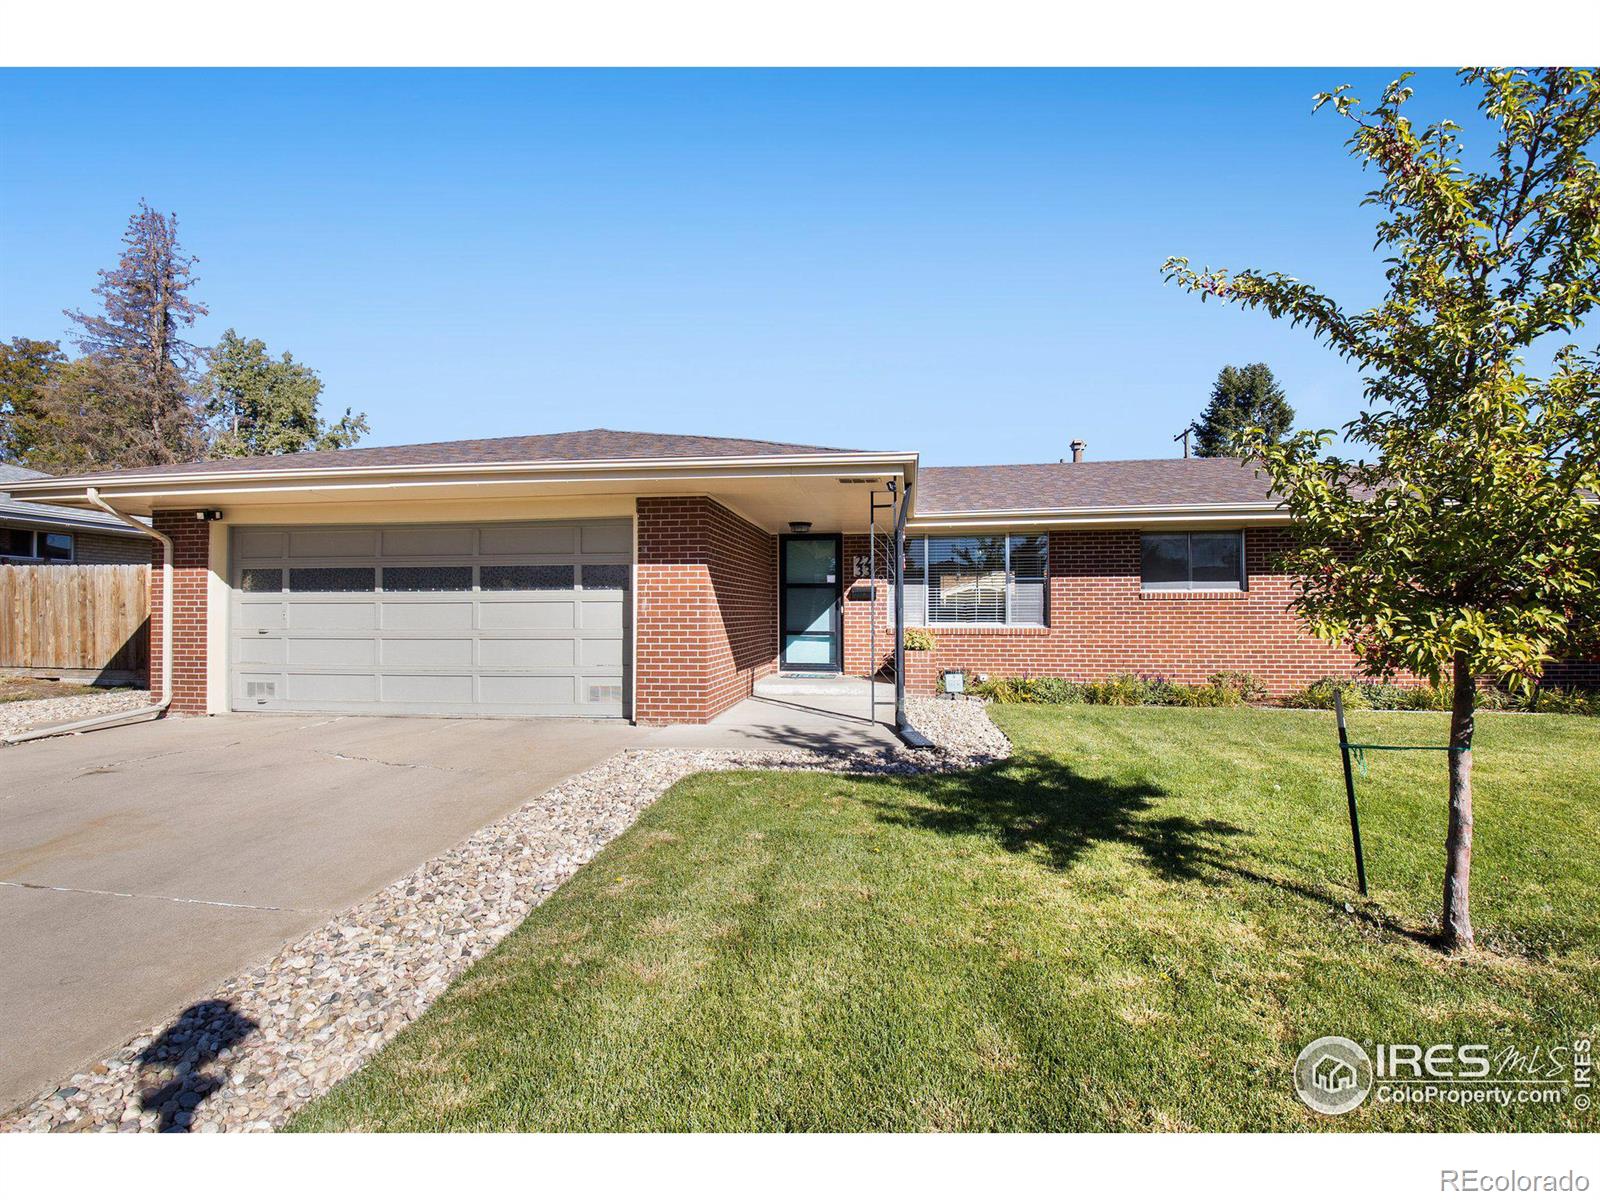 2233  12th street, greeley sold home. Closed on 2023-12-12 for $362,000.